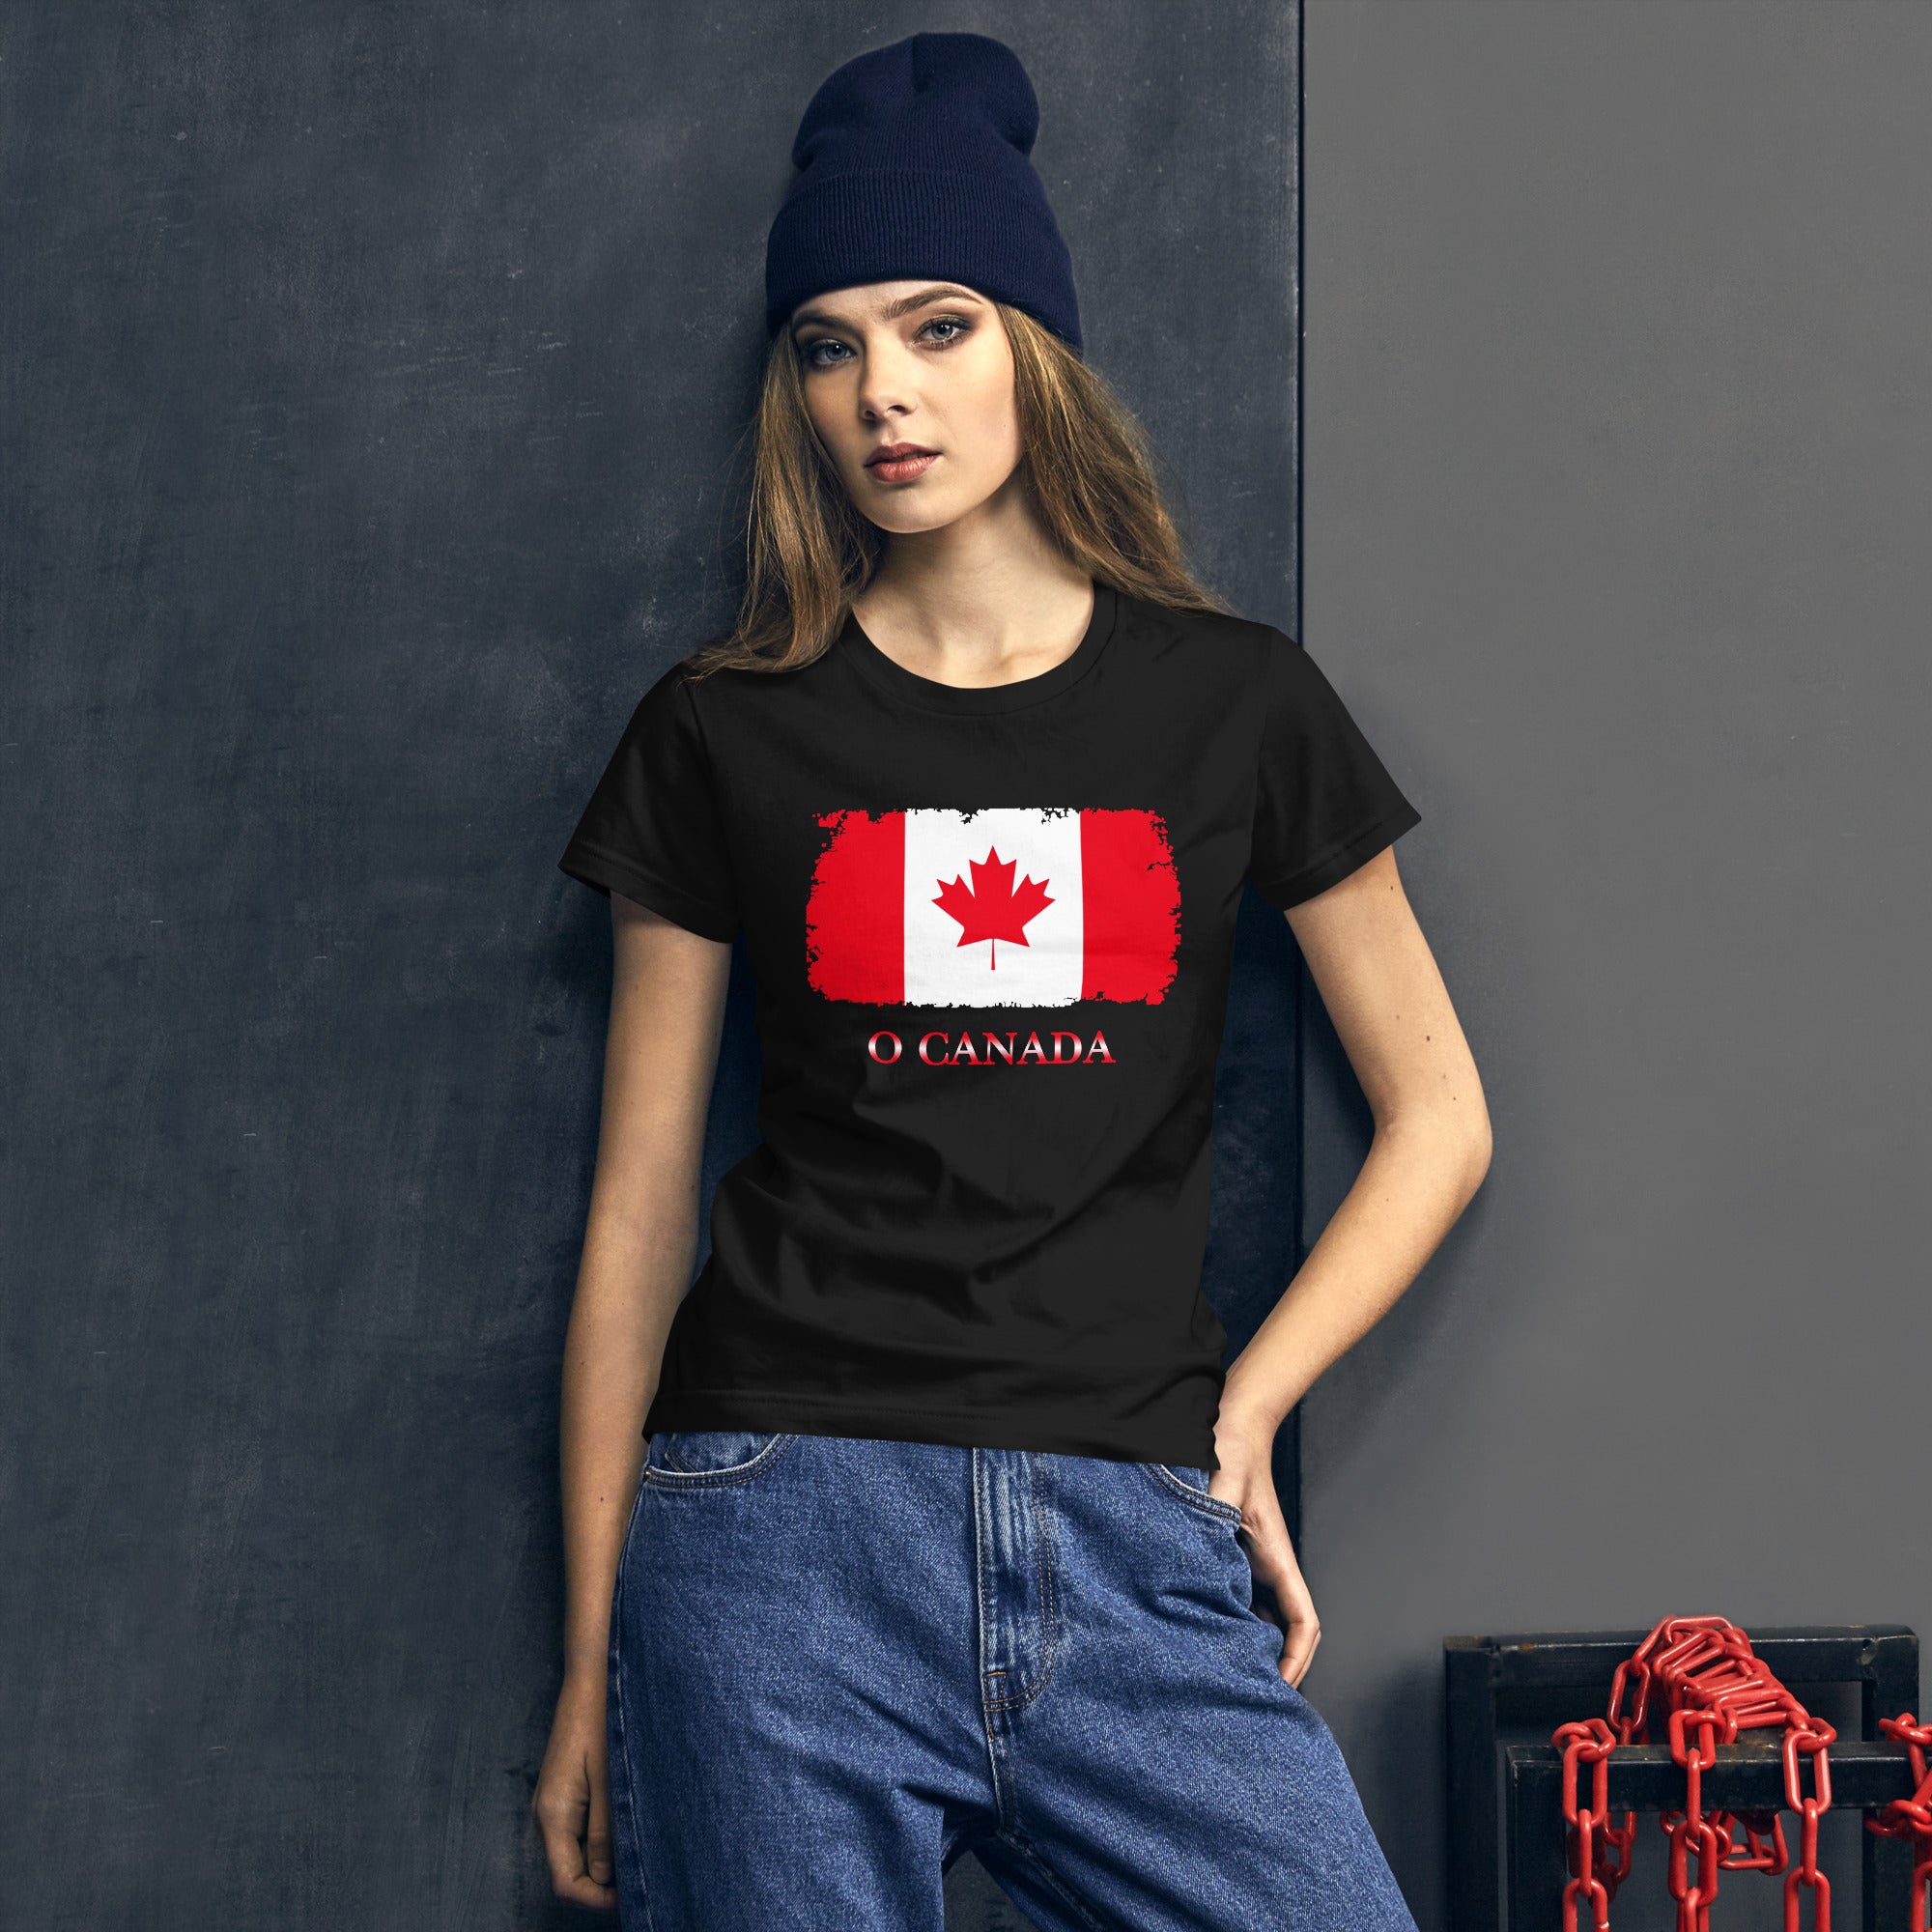 The Official Flag of Canada Maple Leaf Women's Short Sleeve Babydoll T-shirt